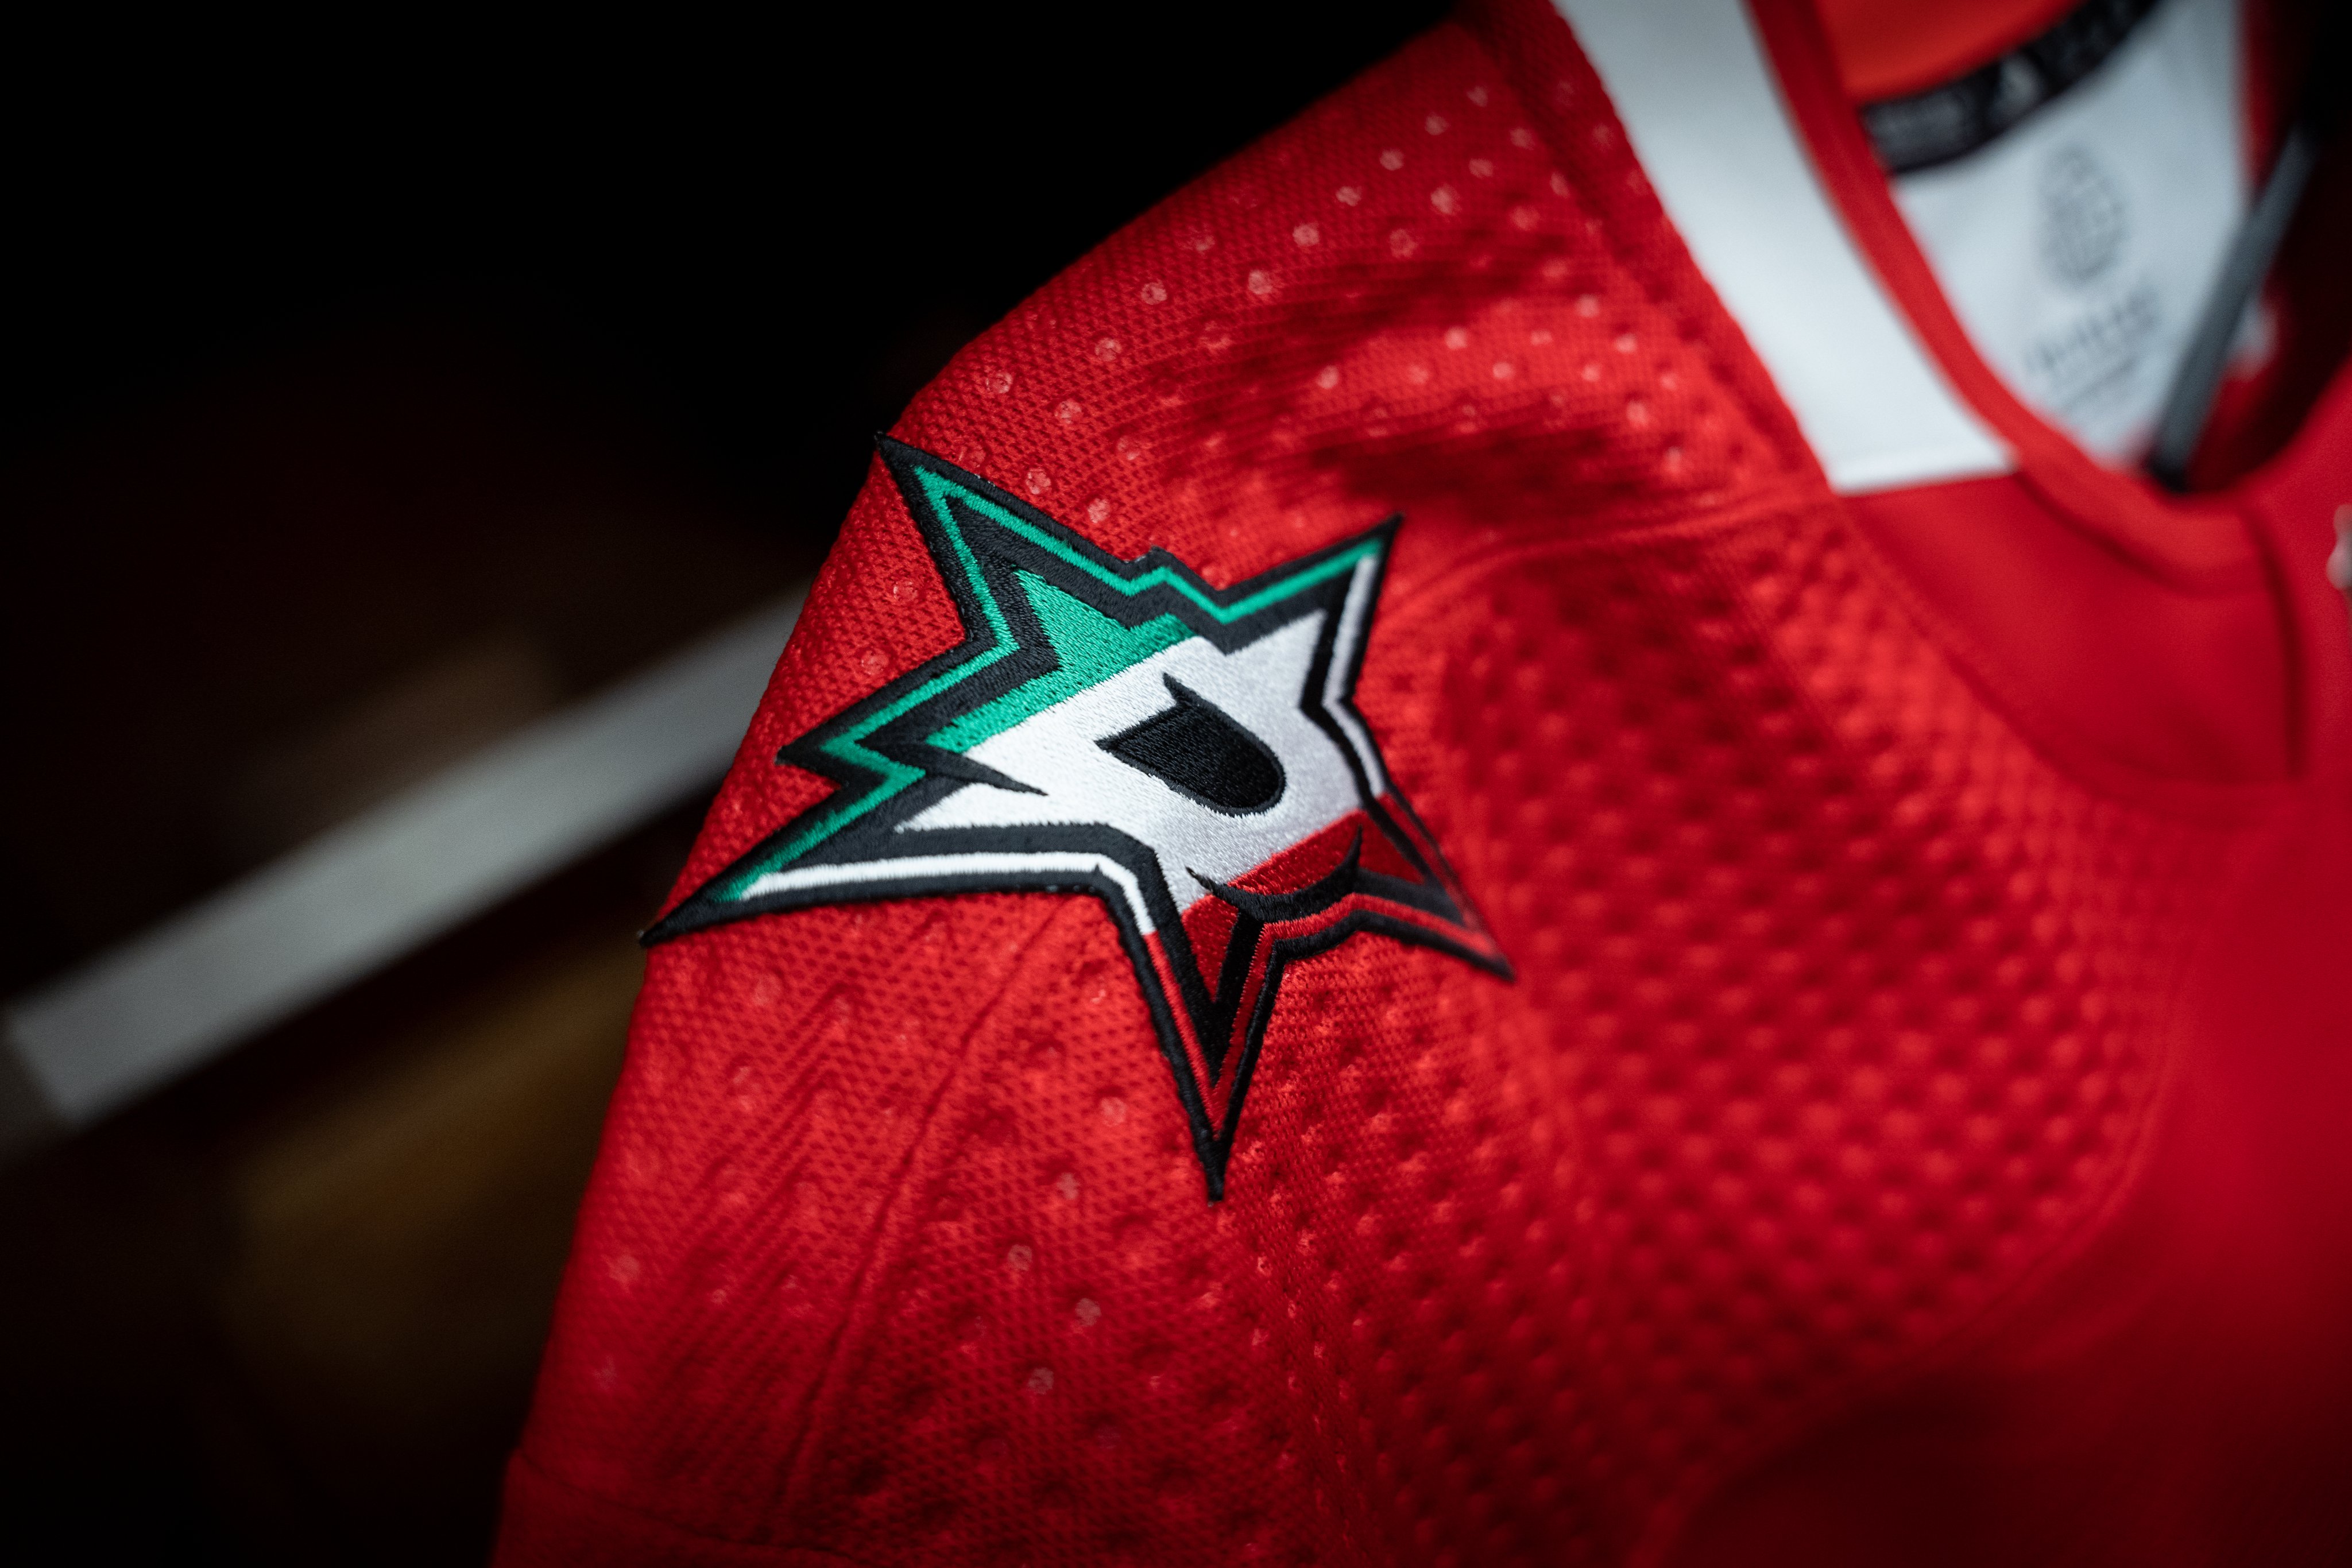 The Dallas Stars wore these Mexican themed jerseys for warm-ups